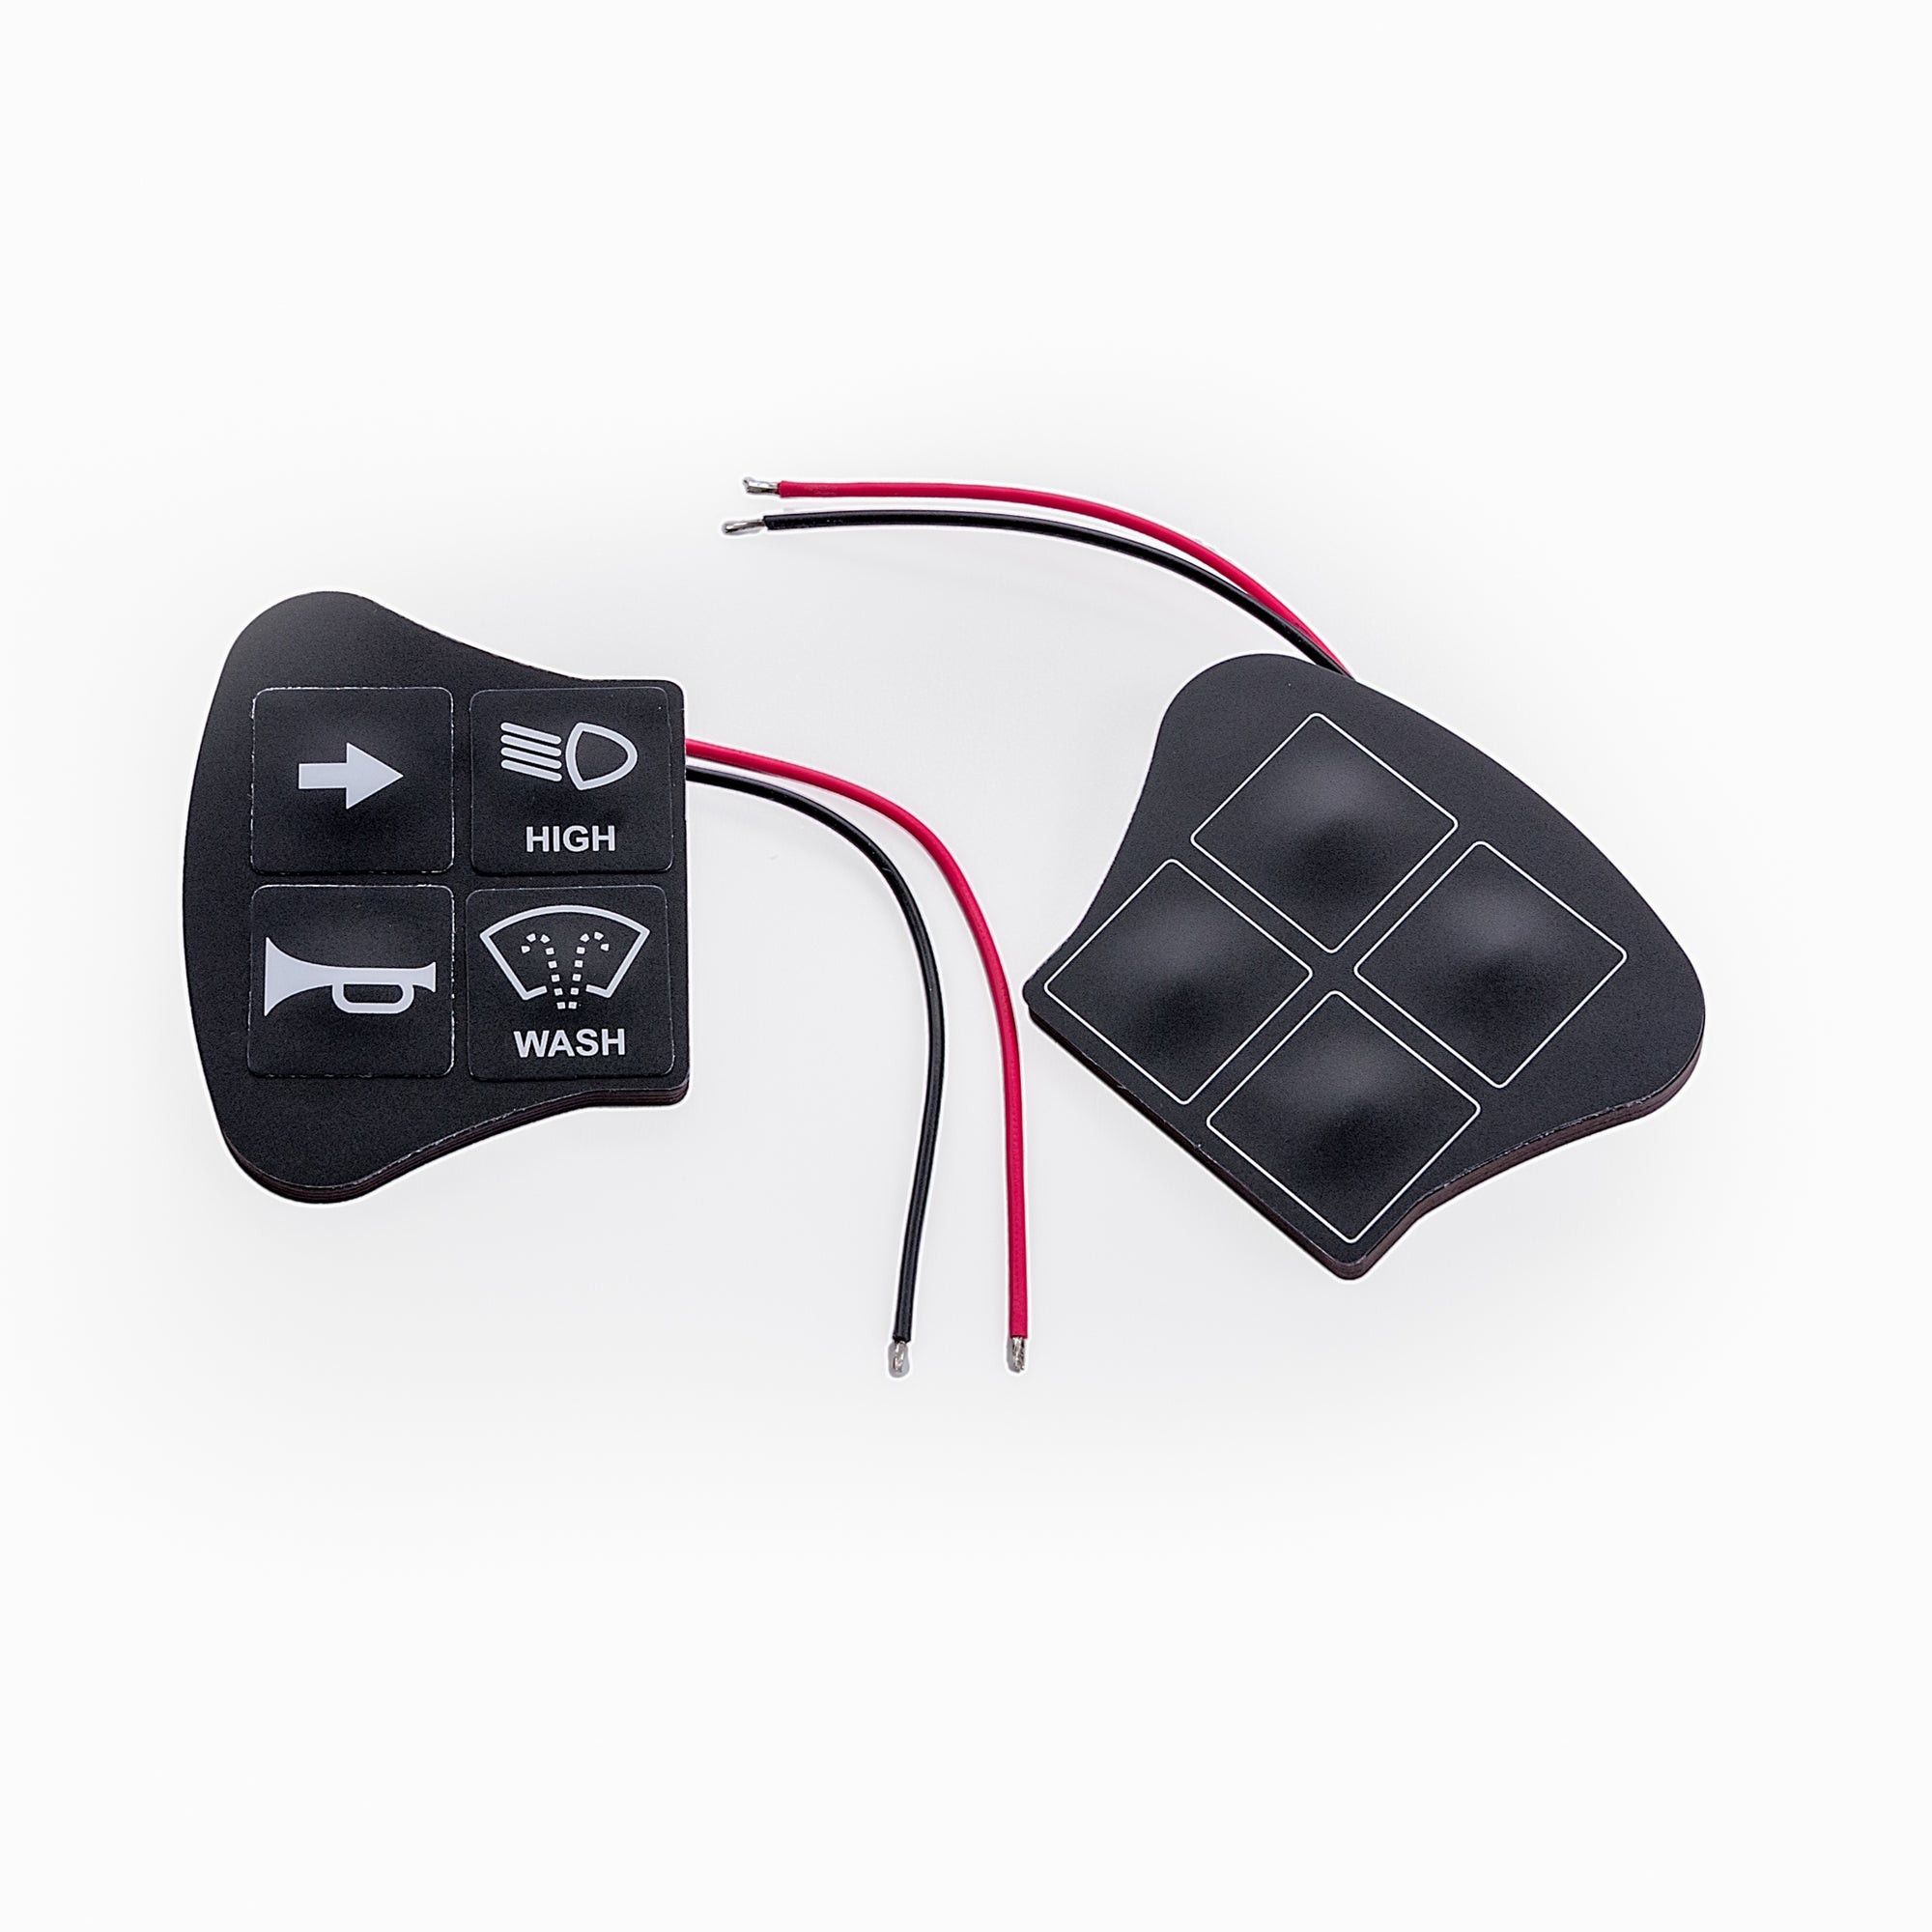 Steering Wheel Keypads For PDM As Used On Ford Fiesta R5 Rally Car